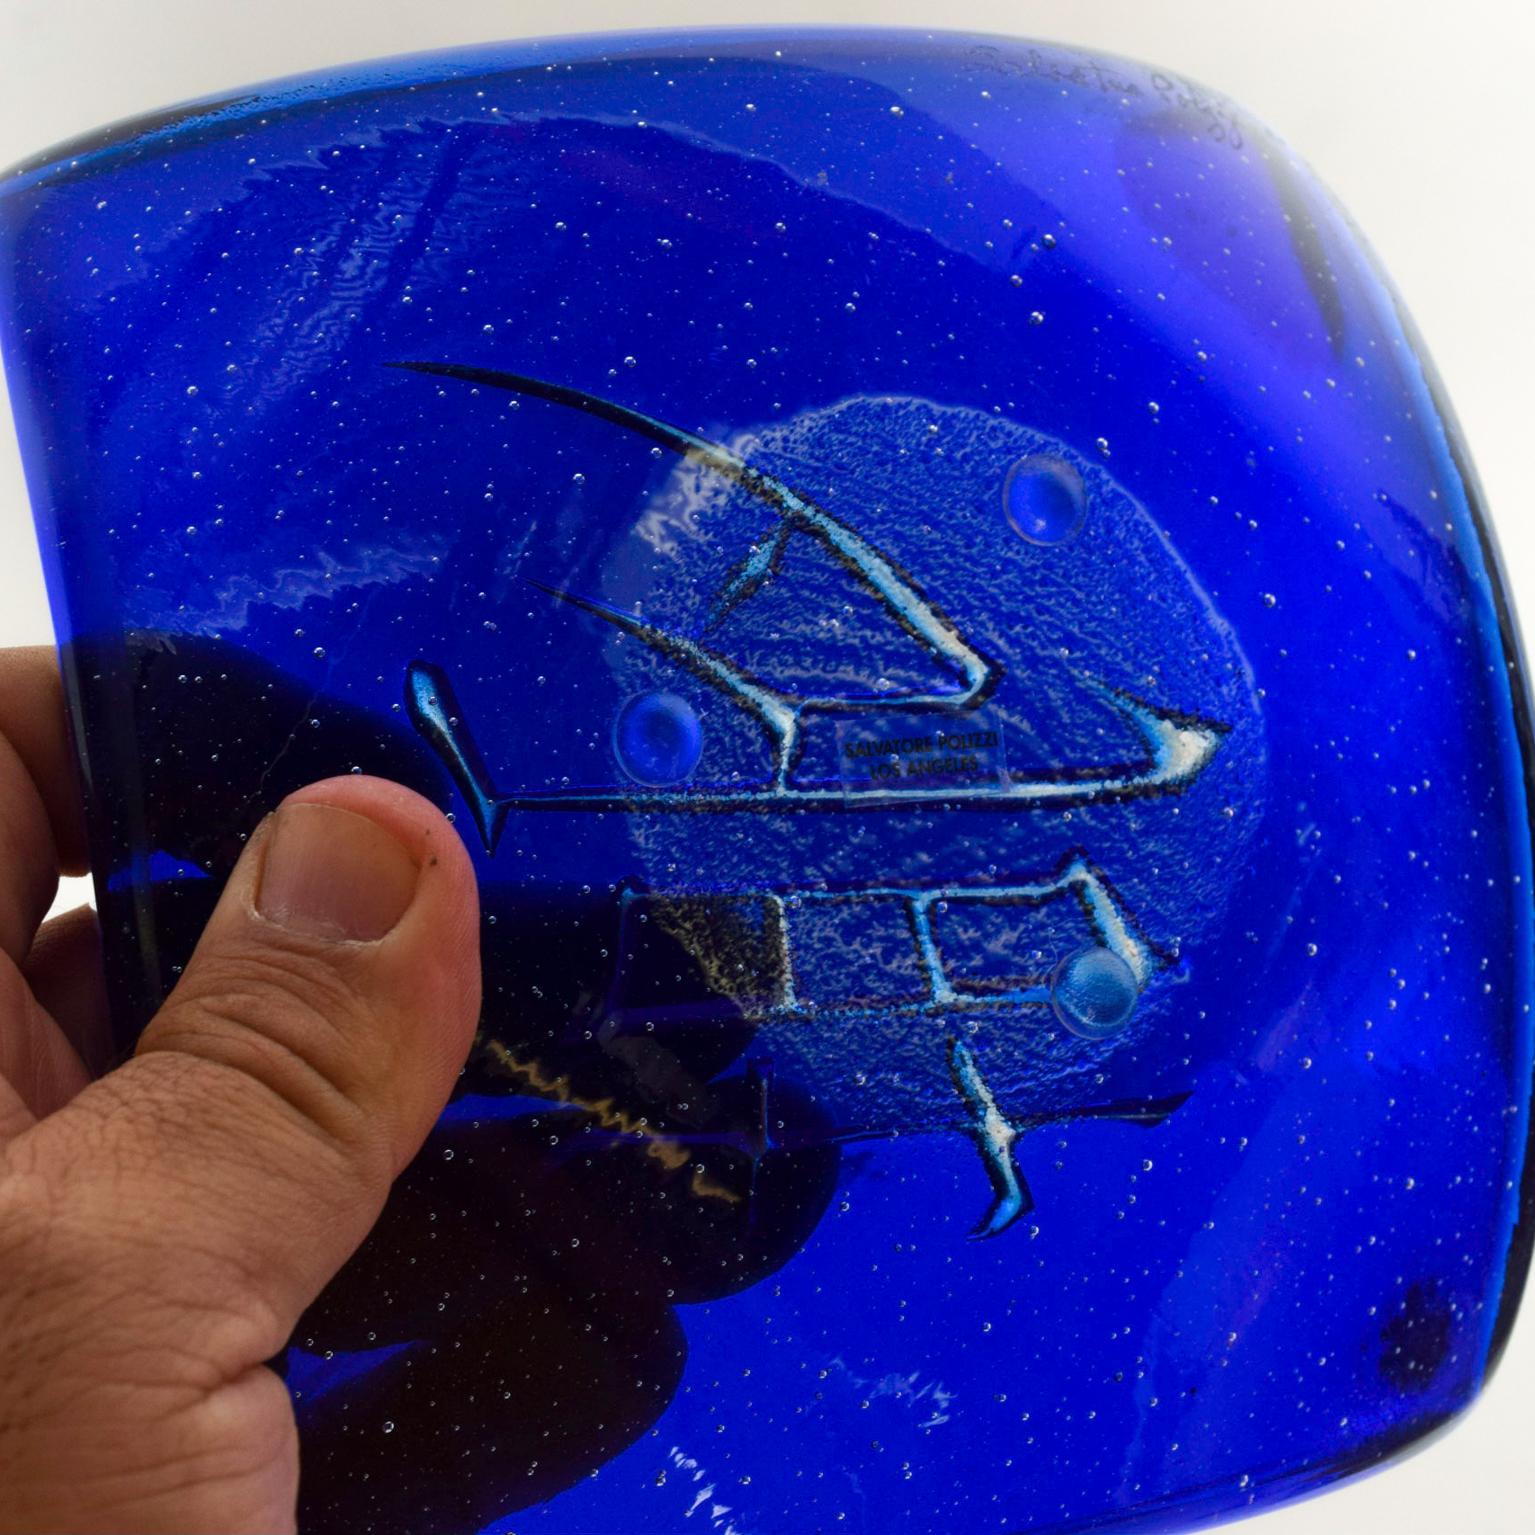 We are pleased to offer for your consideration a midcentury decorative blue glass dish signed by Salvatore Polizzi lovely blue midcentury glass. Los Angeles. Dimensions: 6